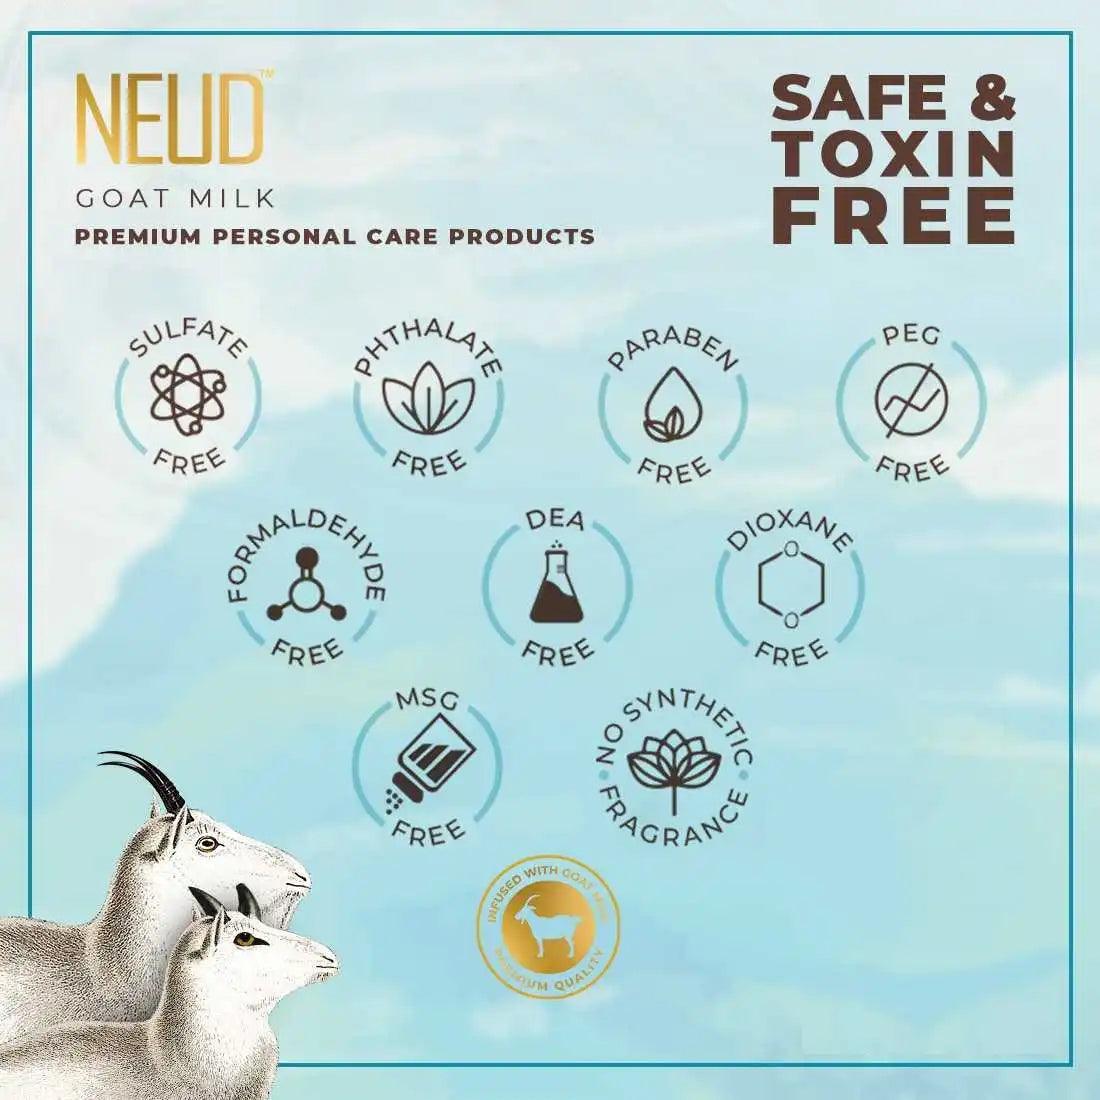 NEUD Goat Milk Skincare and Haircare Products Are Safe And Toxin Free - everteen-neud.com